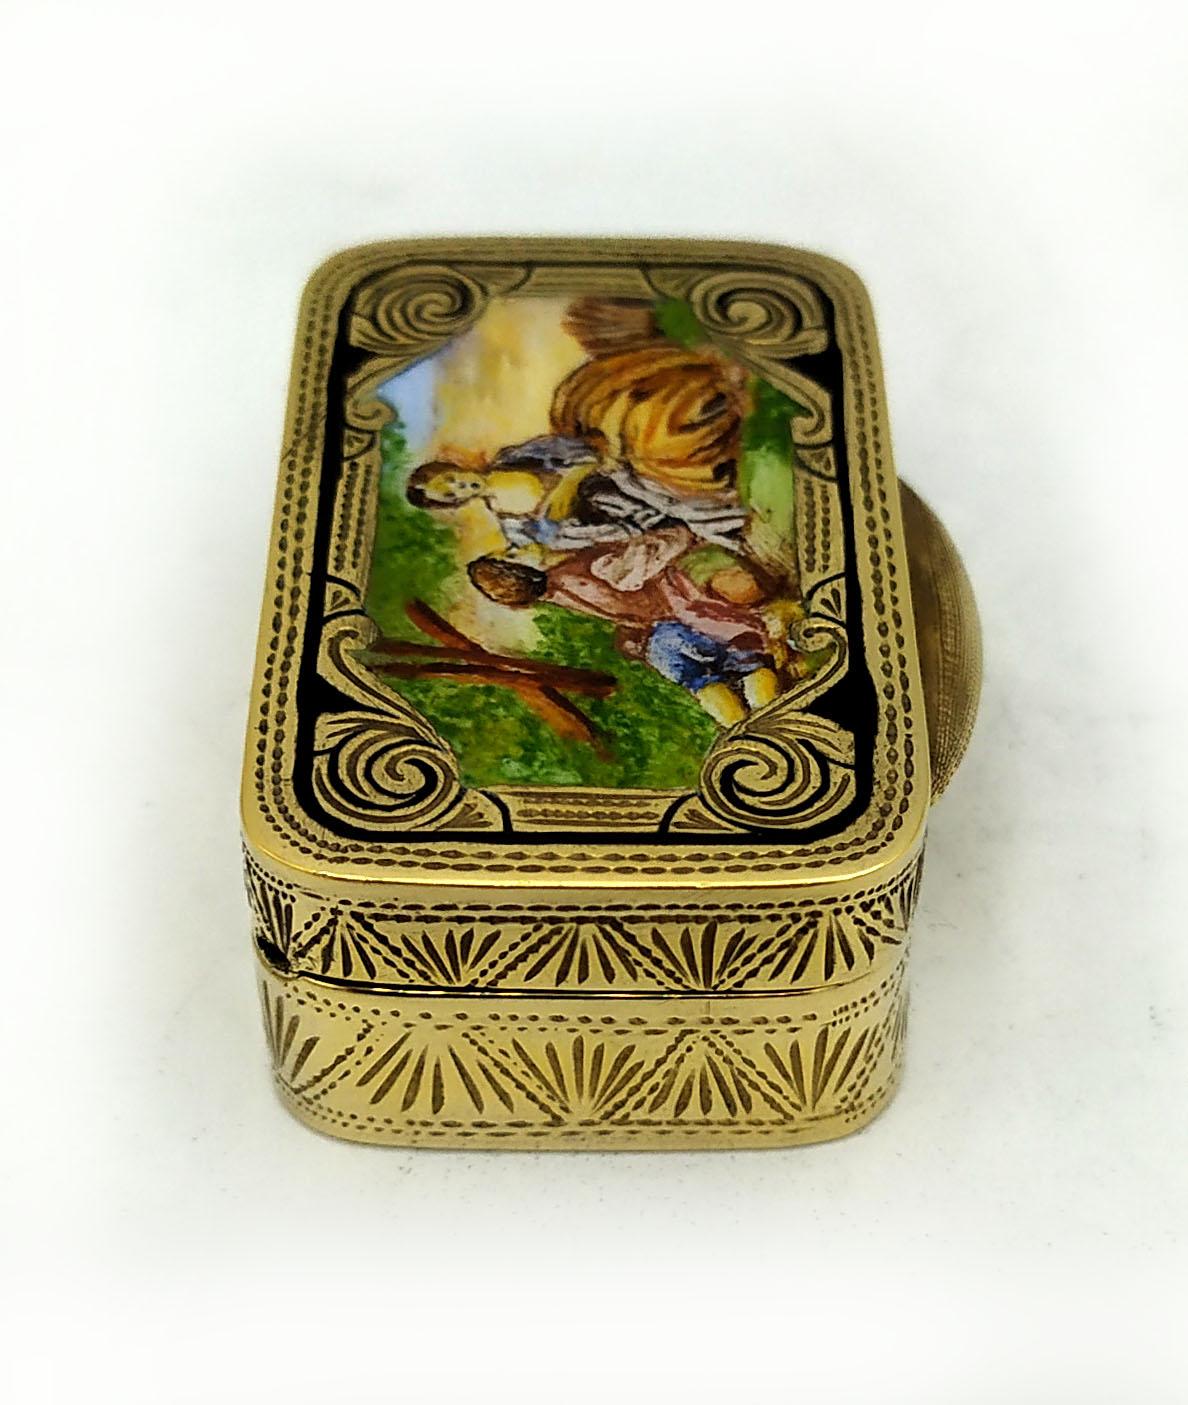 Pill Box Silver is in 925/1000 sterling silver gold plated 24 carats.
Pill Box Silver is Rectangular with translucent fired enamels on guilloché.
Pill Box Silver has a hand-painted miniature and fine hand engravings.
Pill Box Silver Sterling is in